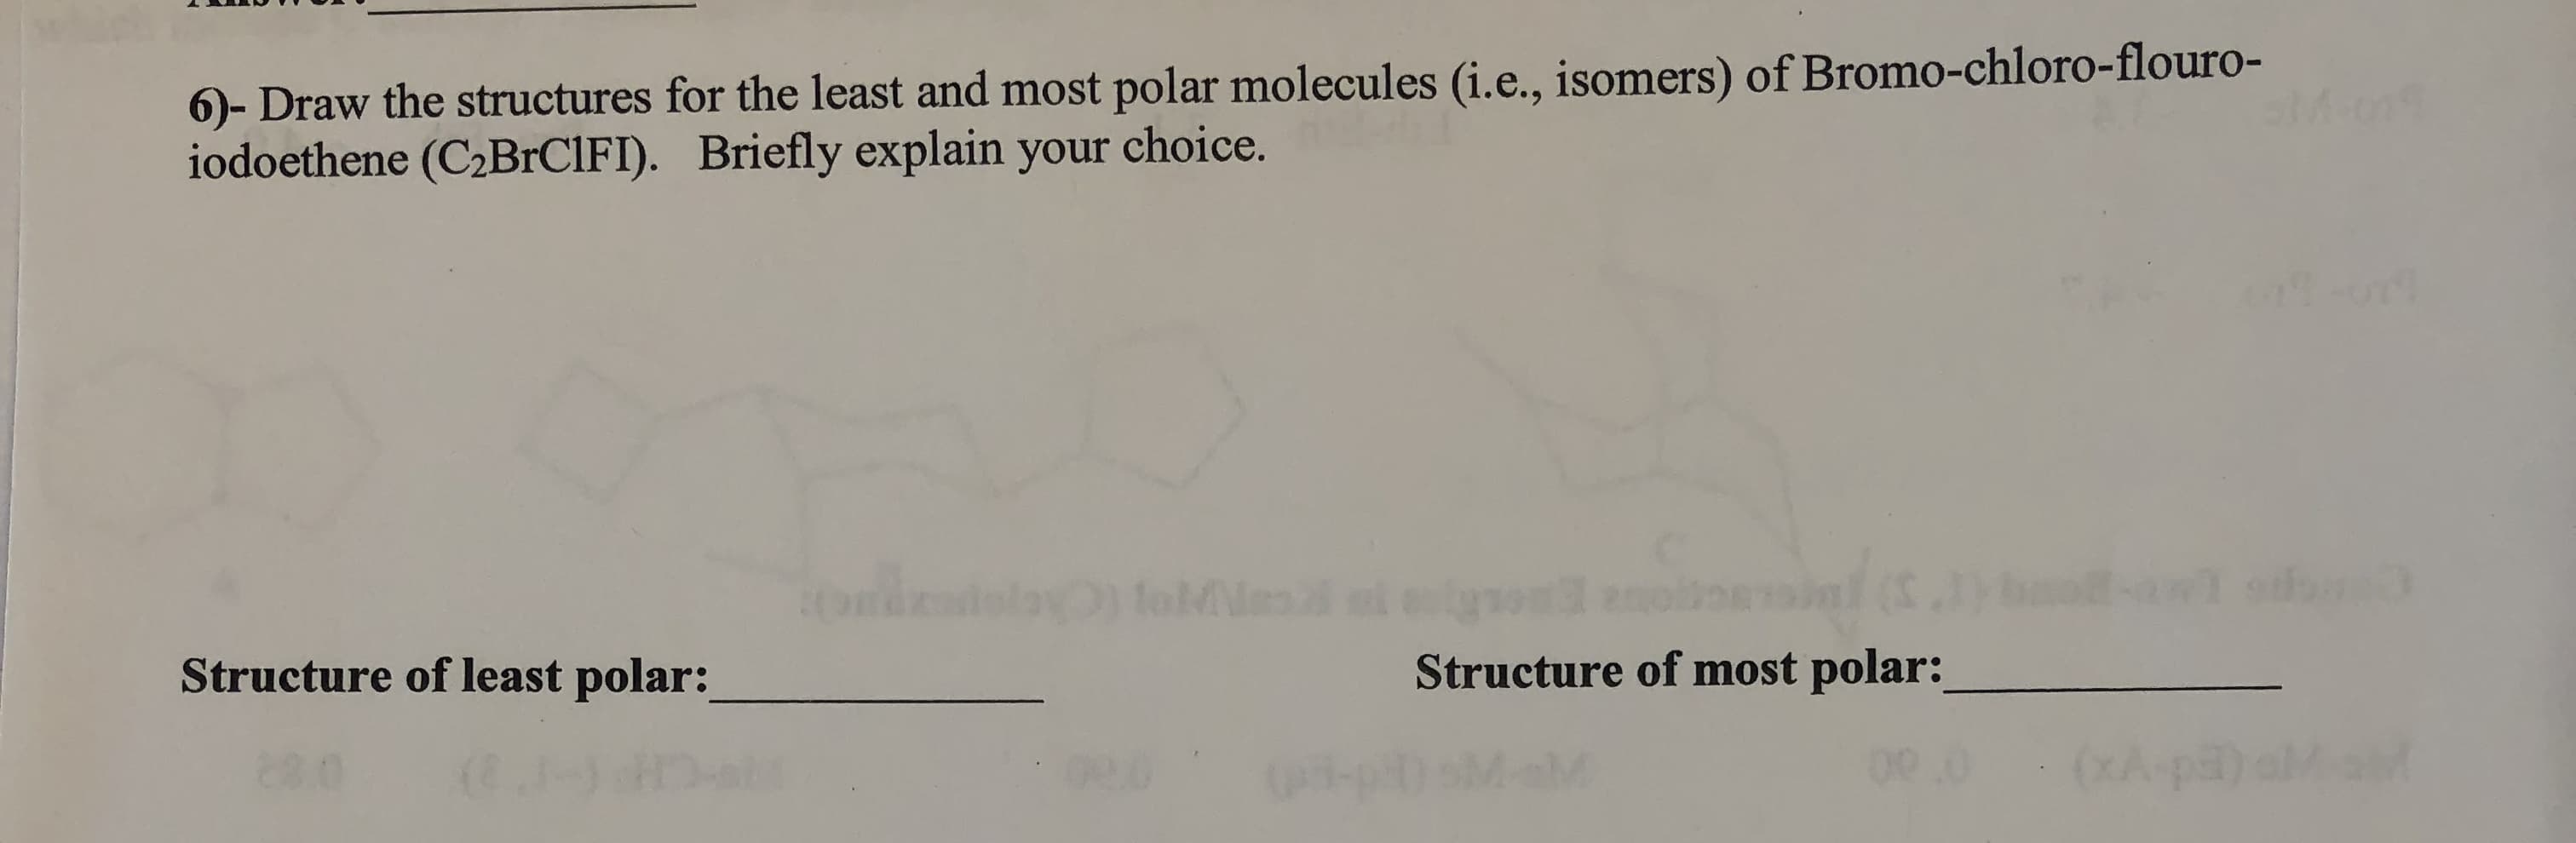 ouro-
6)- Draw the structures for the least and most polar molecules (i.e.,isomers) of Bromo-chloro-fl
iodoethene (C2BrCIFI). Briefly explain your choice.
Structure of least polar:
Structure of most polar:
